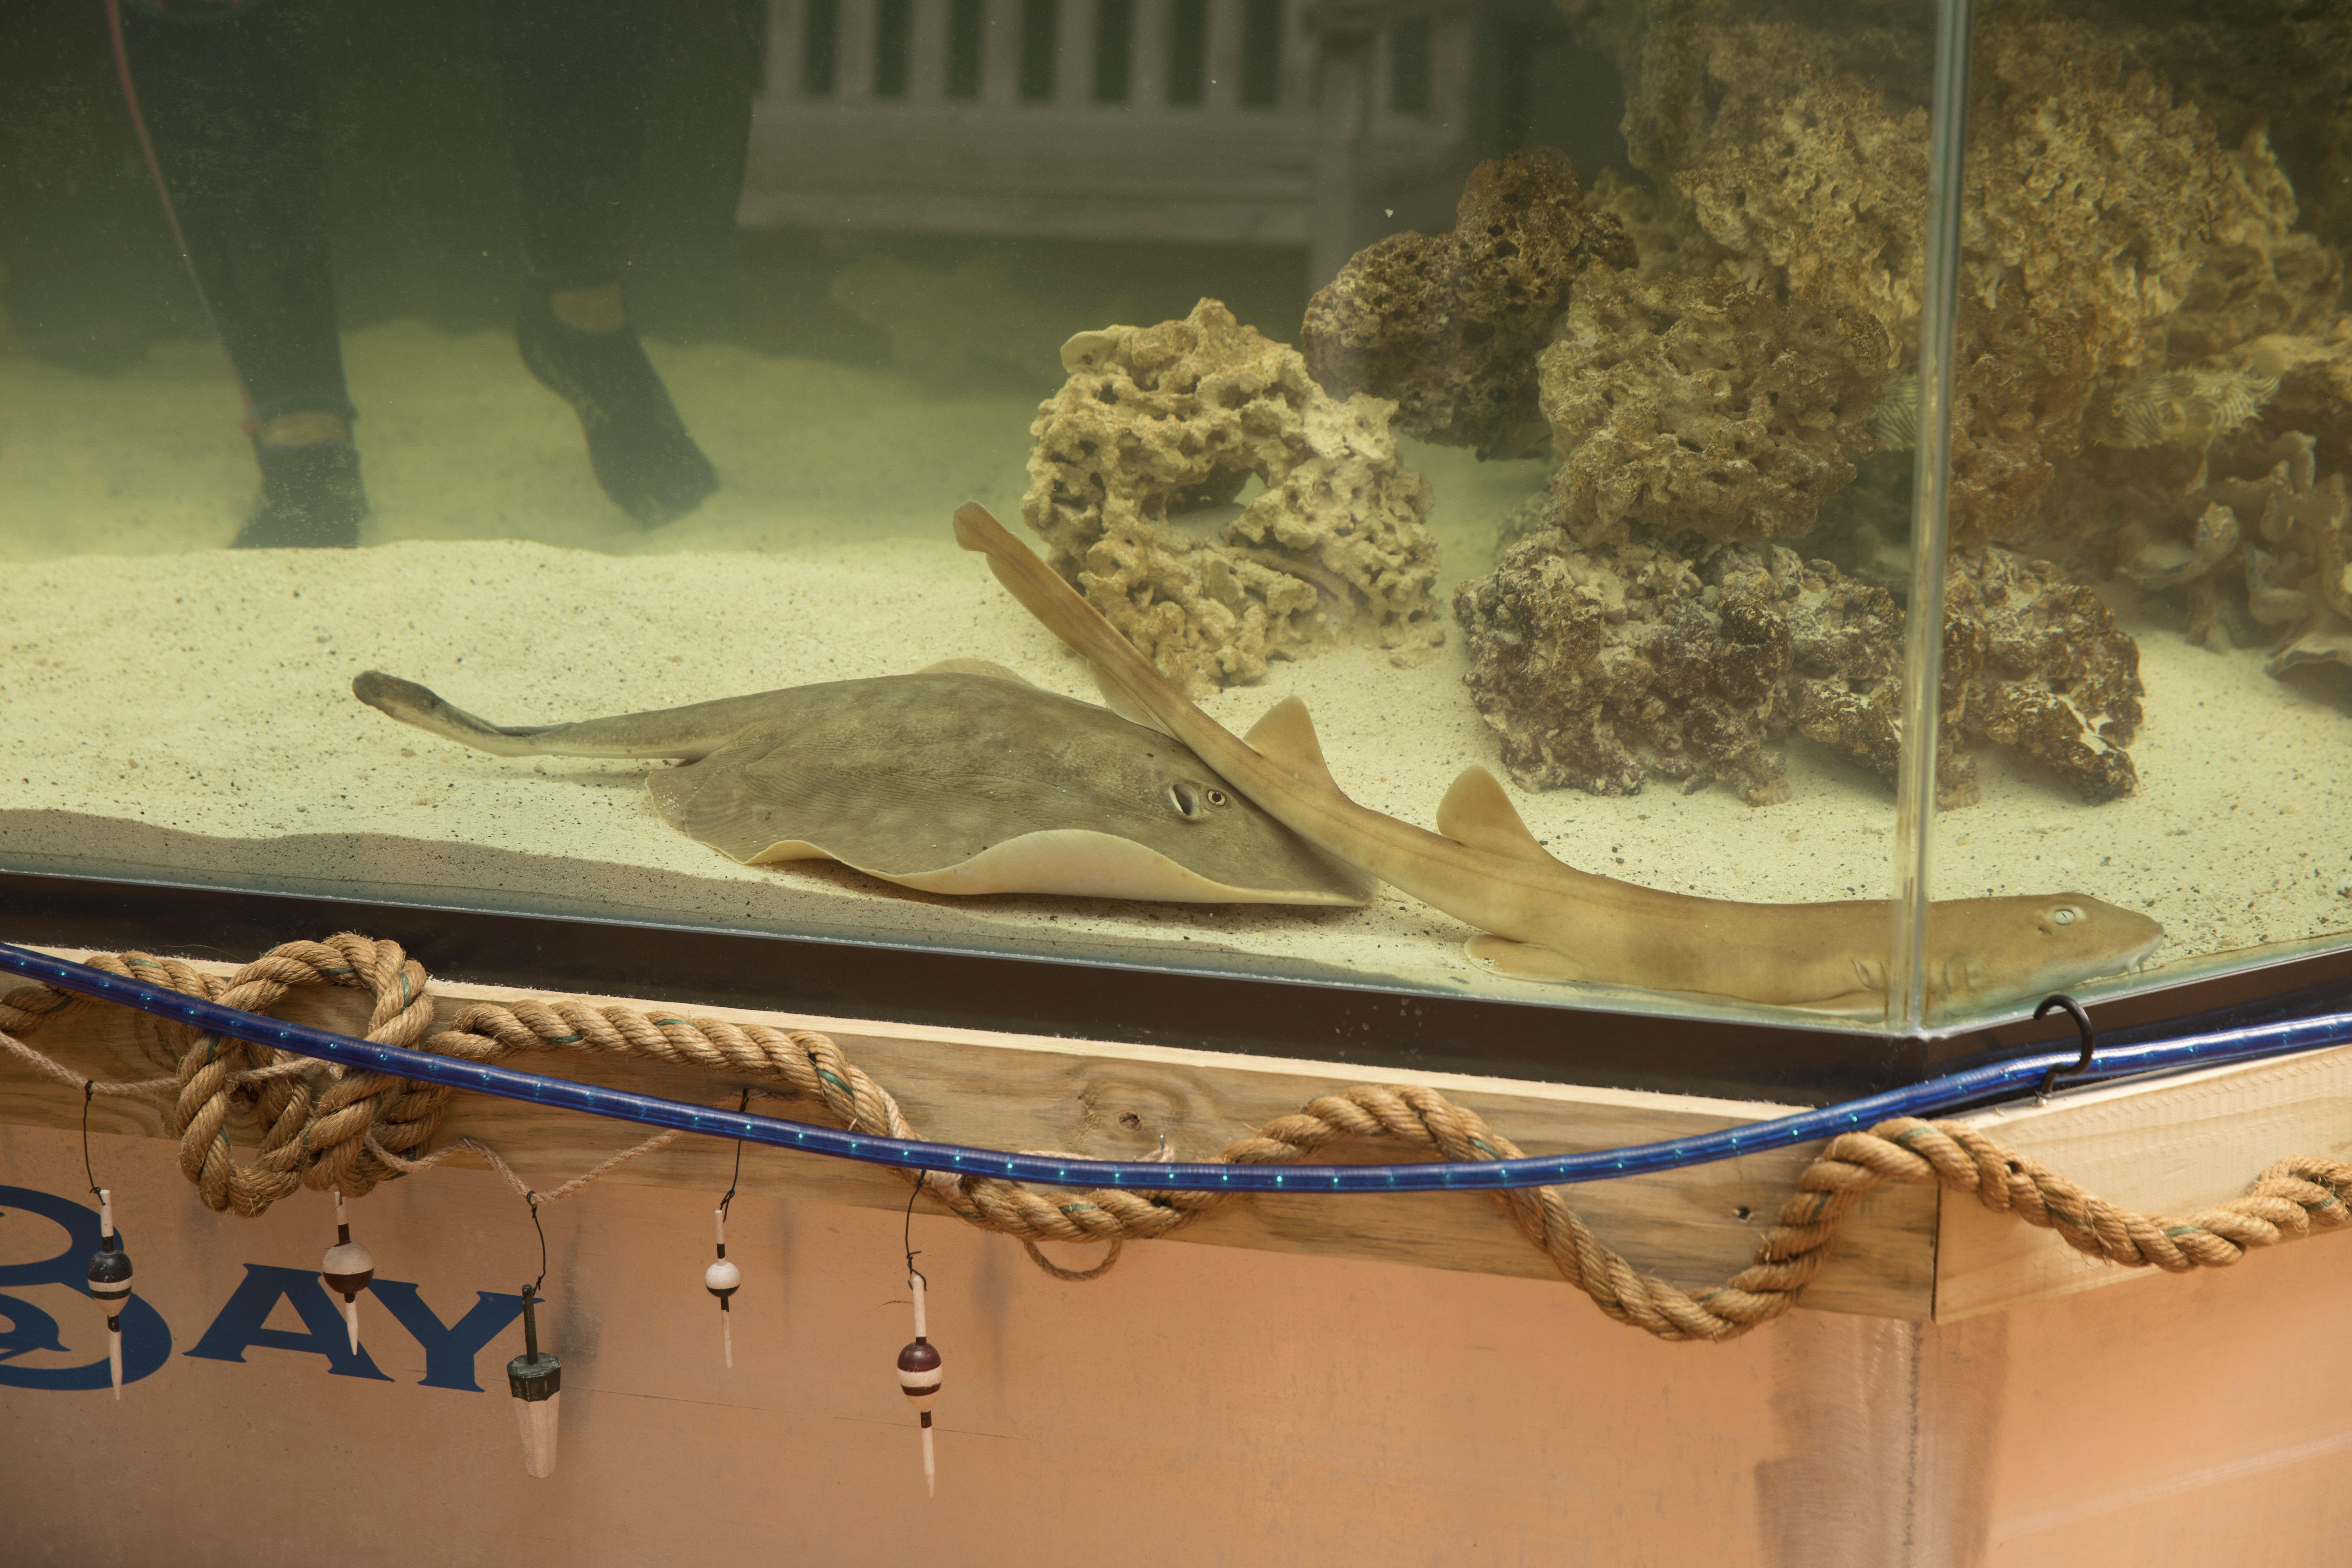 Tests show stingray had reproductive disease, not pregnant by sharks